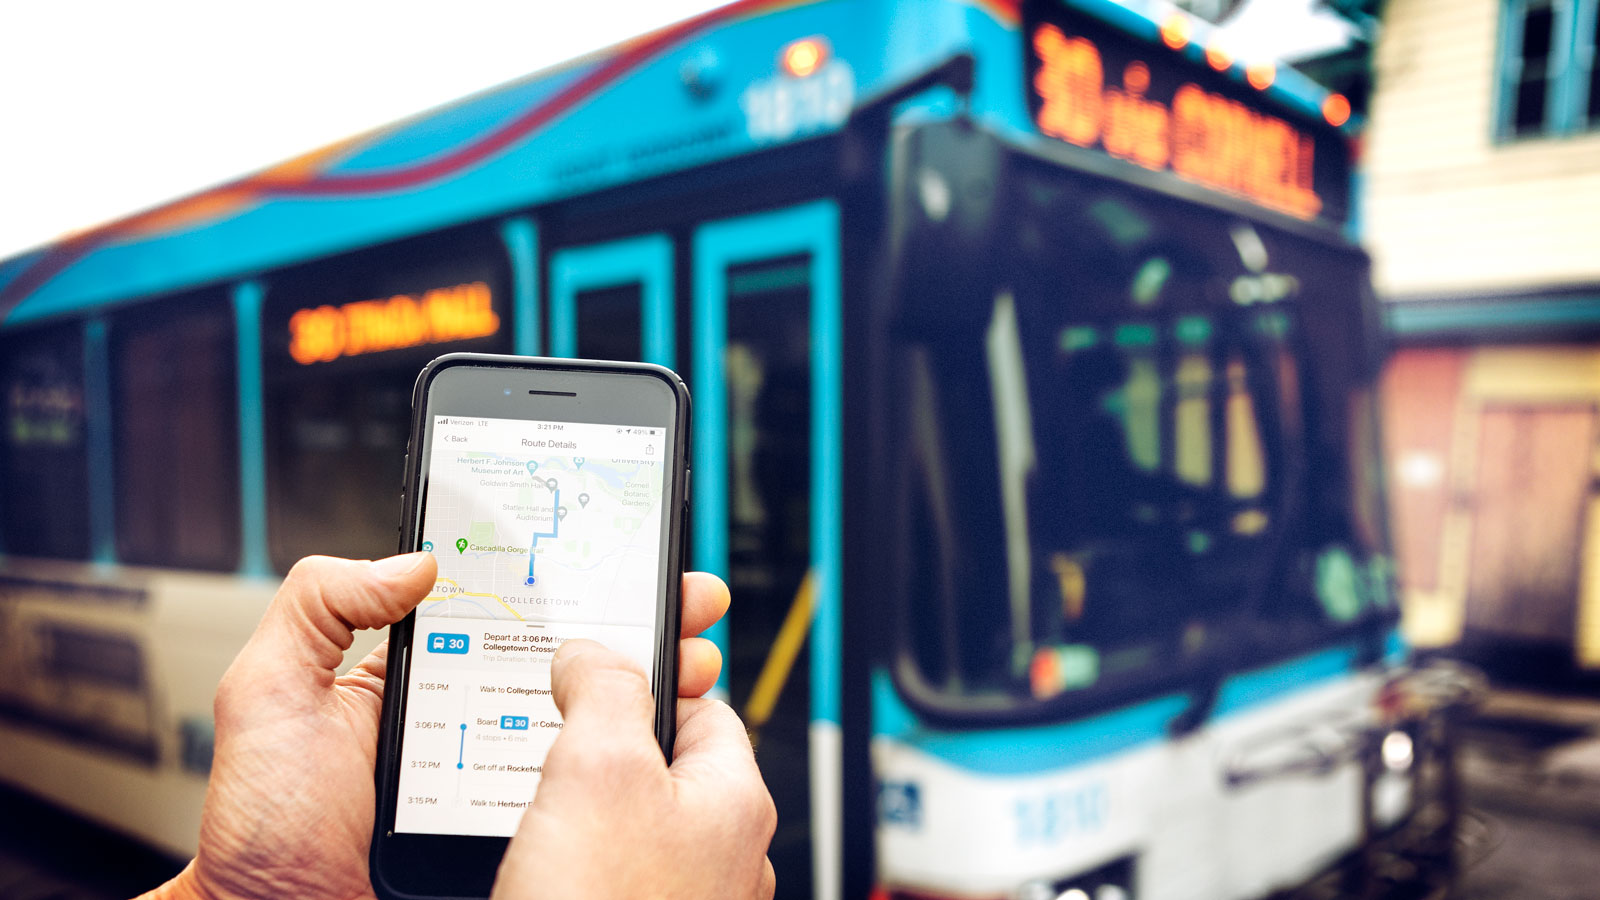 Hands holding a smartphone with the Ithaca Transit app on the screen with a bus behind it